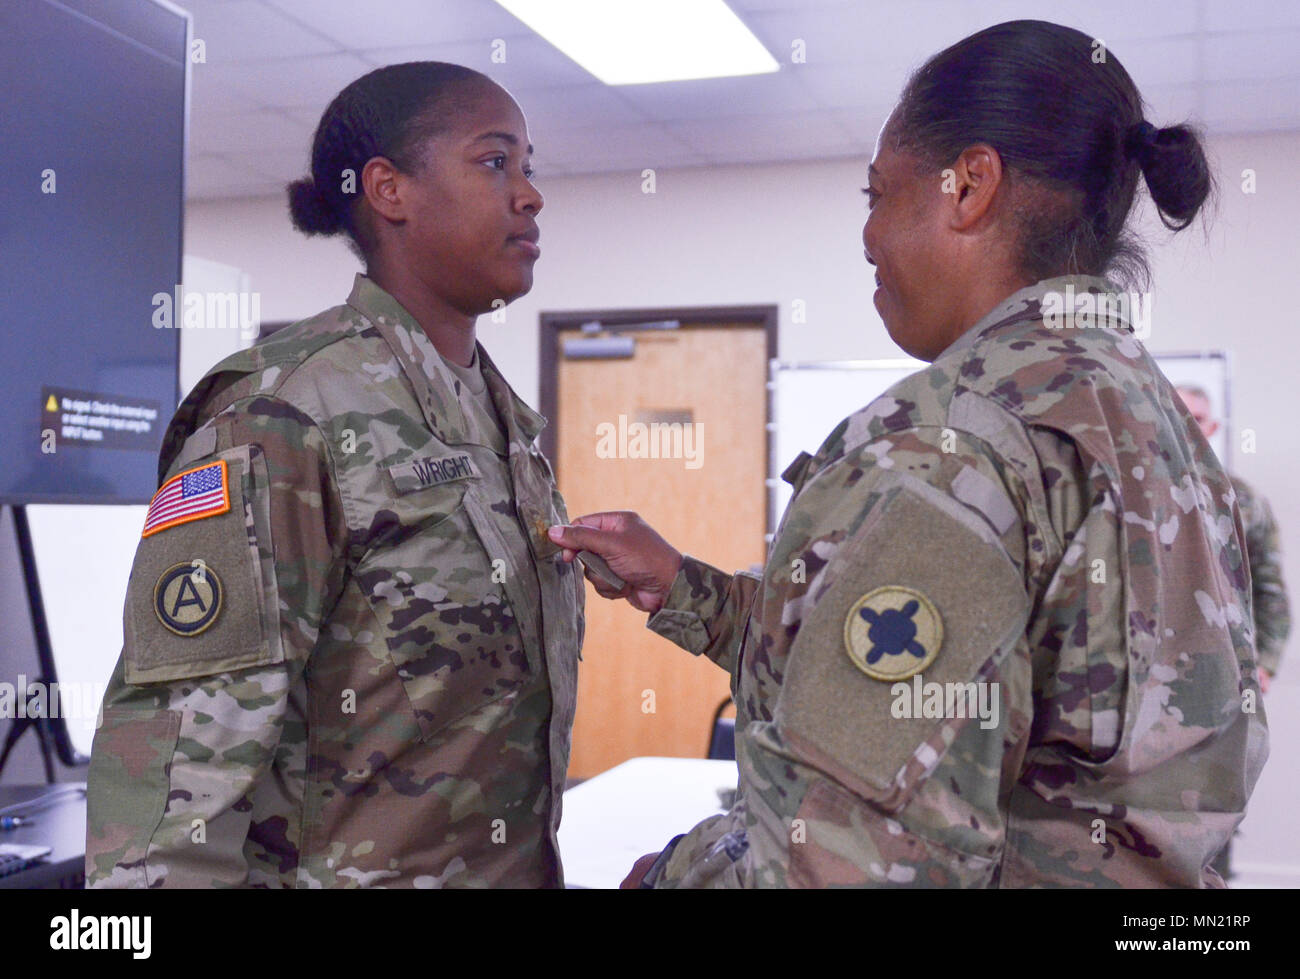 Col. Cheryl Anderson, the Deputy Commander of the 184th Sustainment Command, pins the rank of major on Tamiko J. Wright at Camp Shelby Joint Forces Training Center, during a ceremony on Aug 12. (Mississippi National Guard photo by Staff Sgt. Veronica McNabb, 184th Sustainment Command Public Affairs) Stock Photo